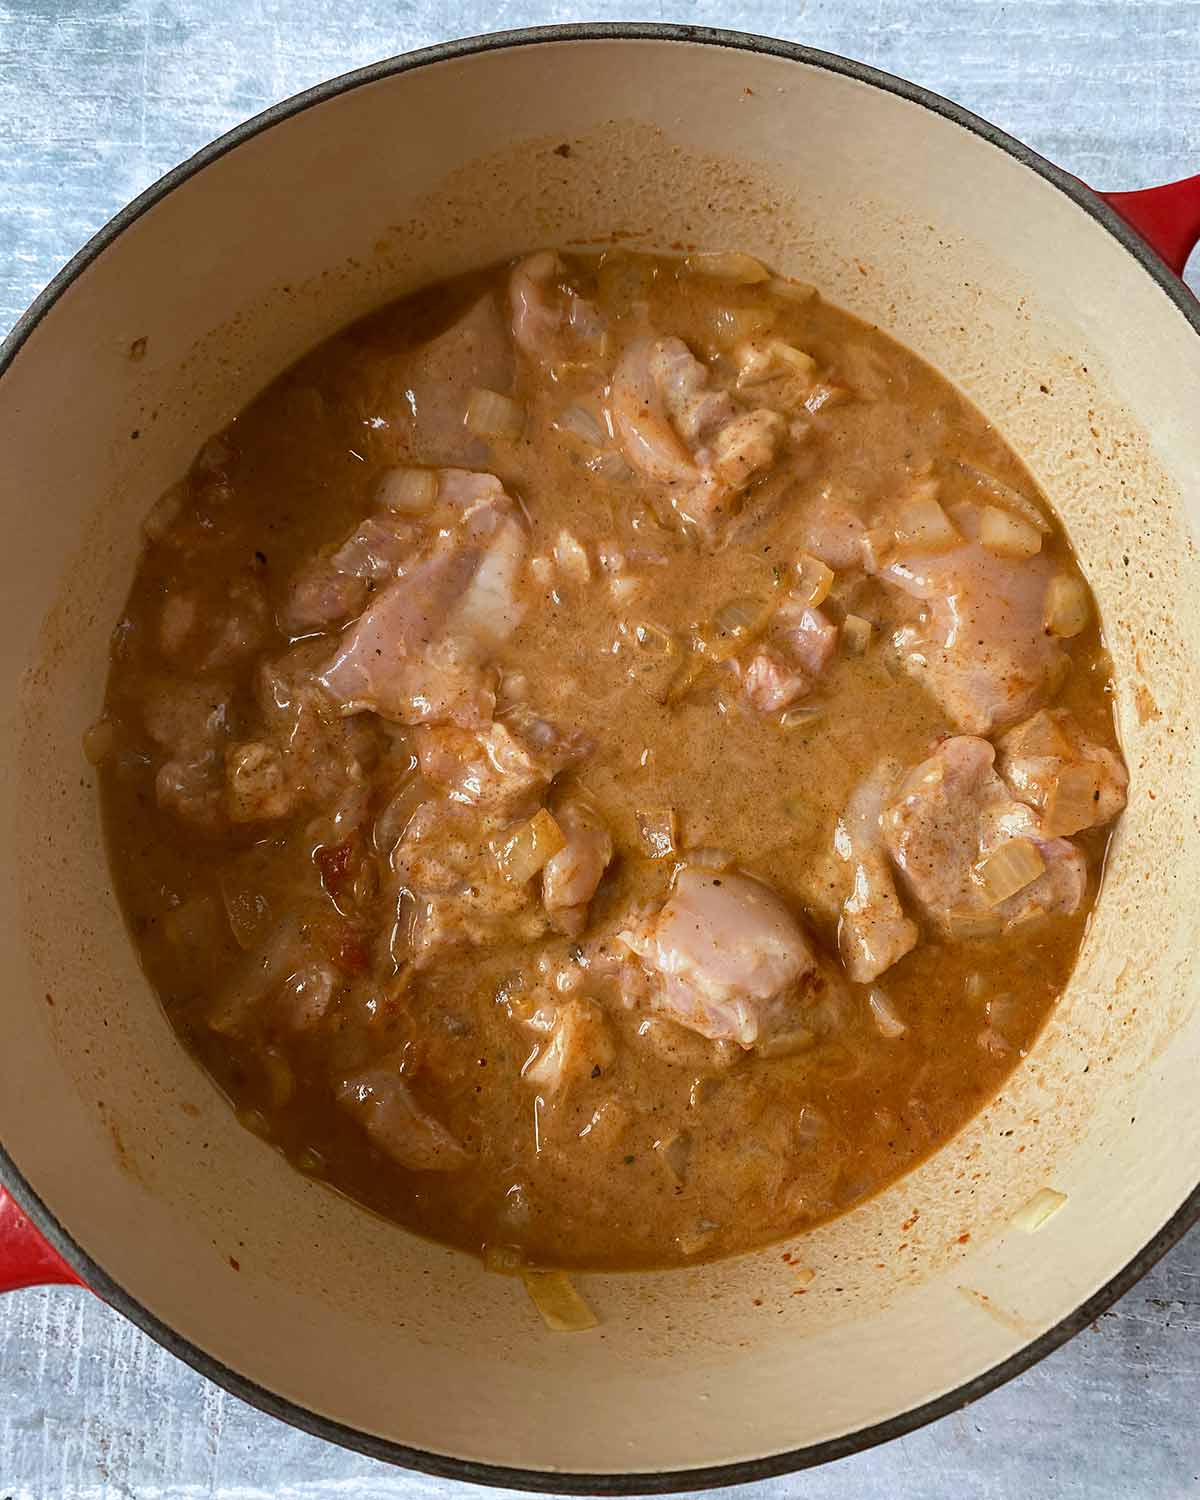 Chicken chunks in a brown curry sauce.